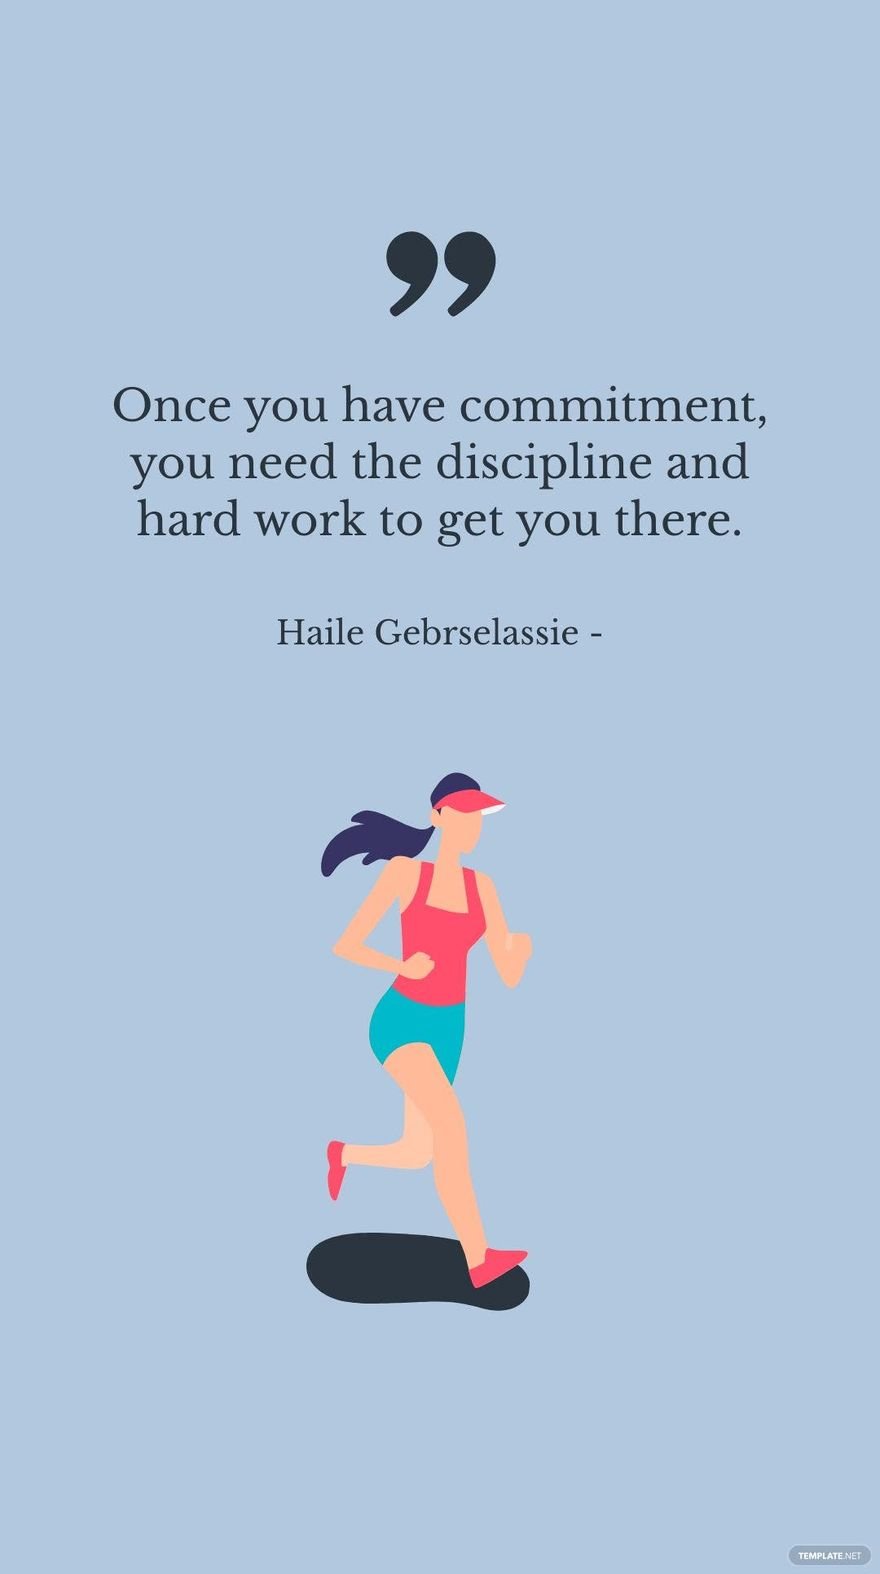 Haile Gebrselassie - Once you have commitment, you need the discipline and hard work to get you there.